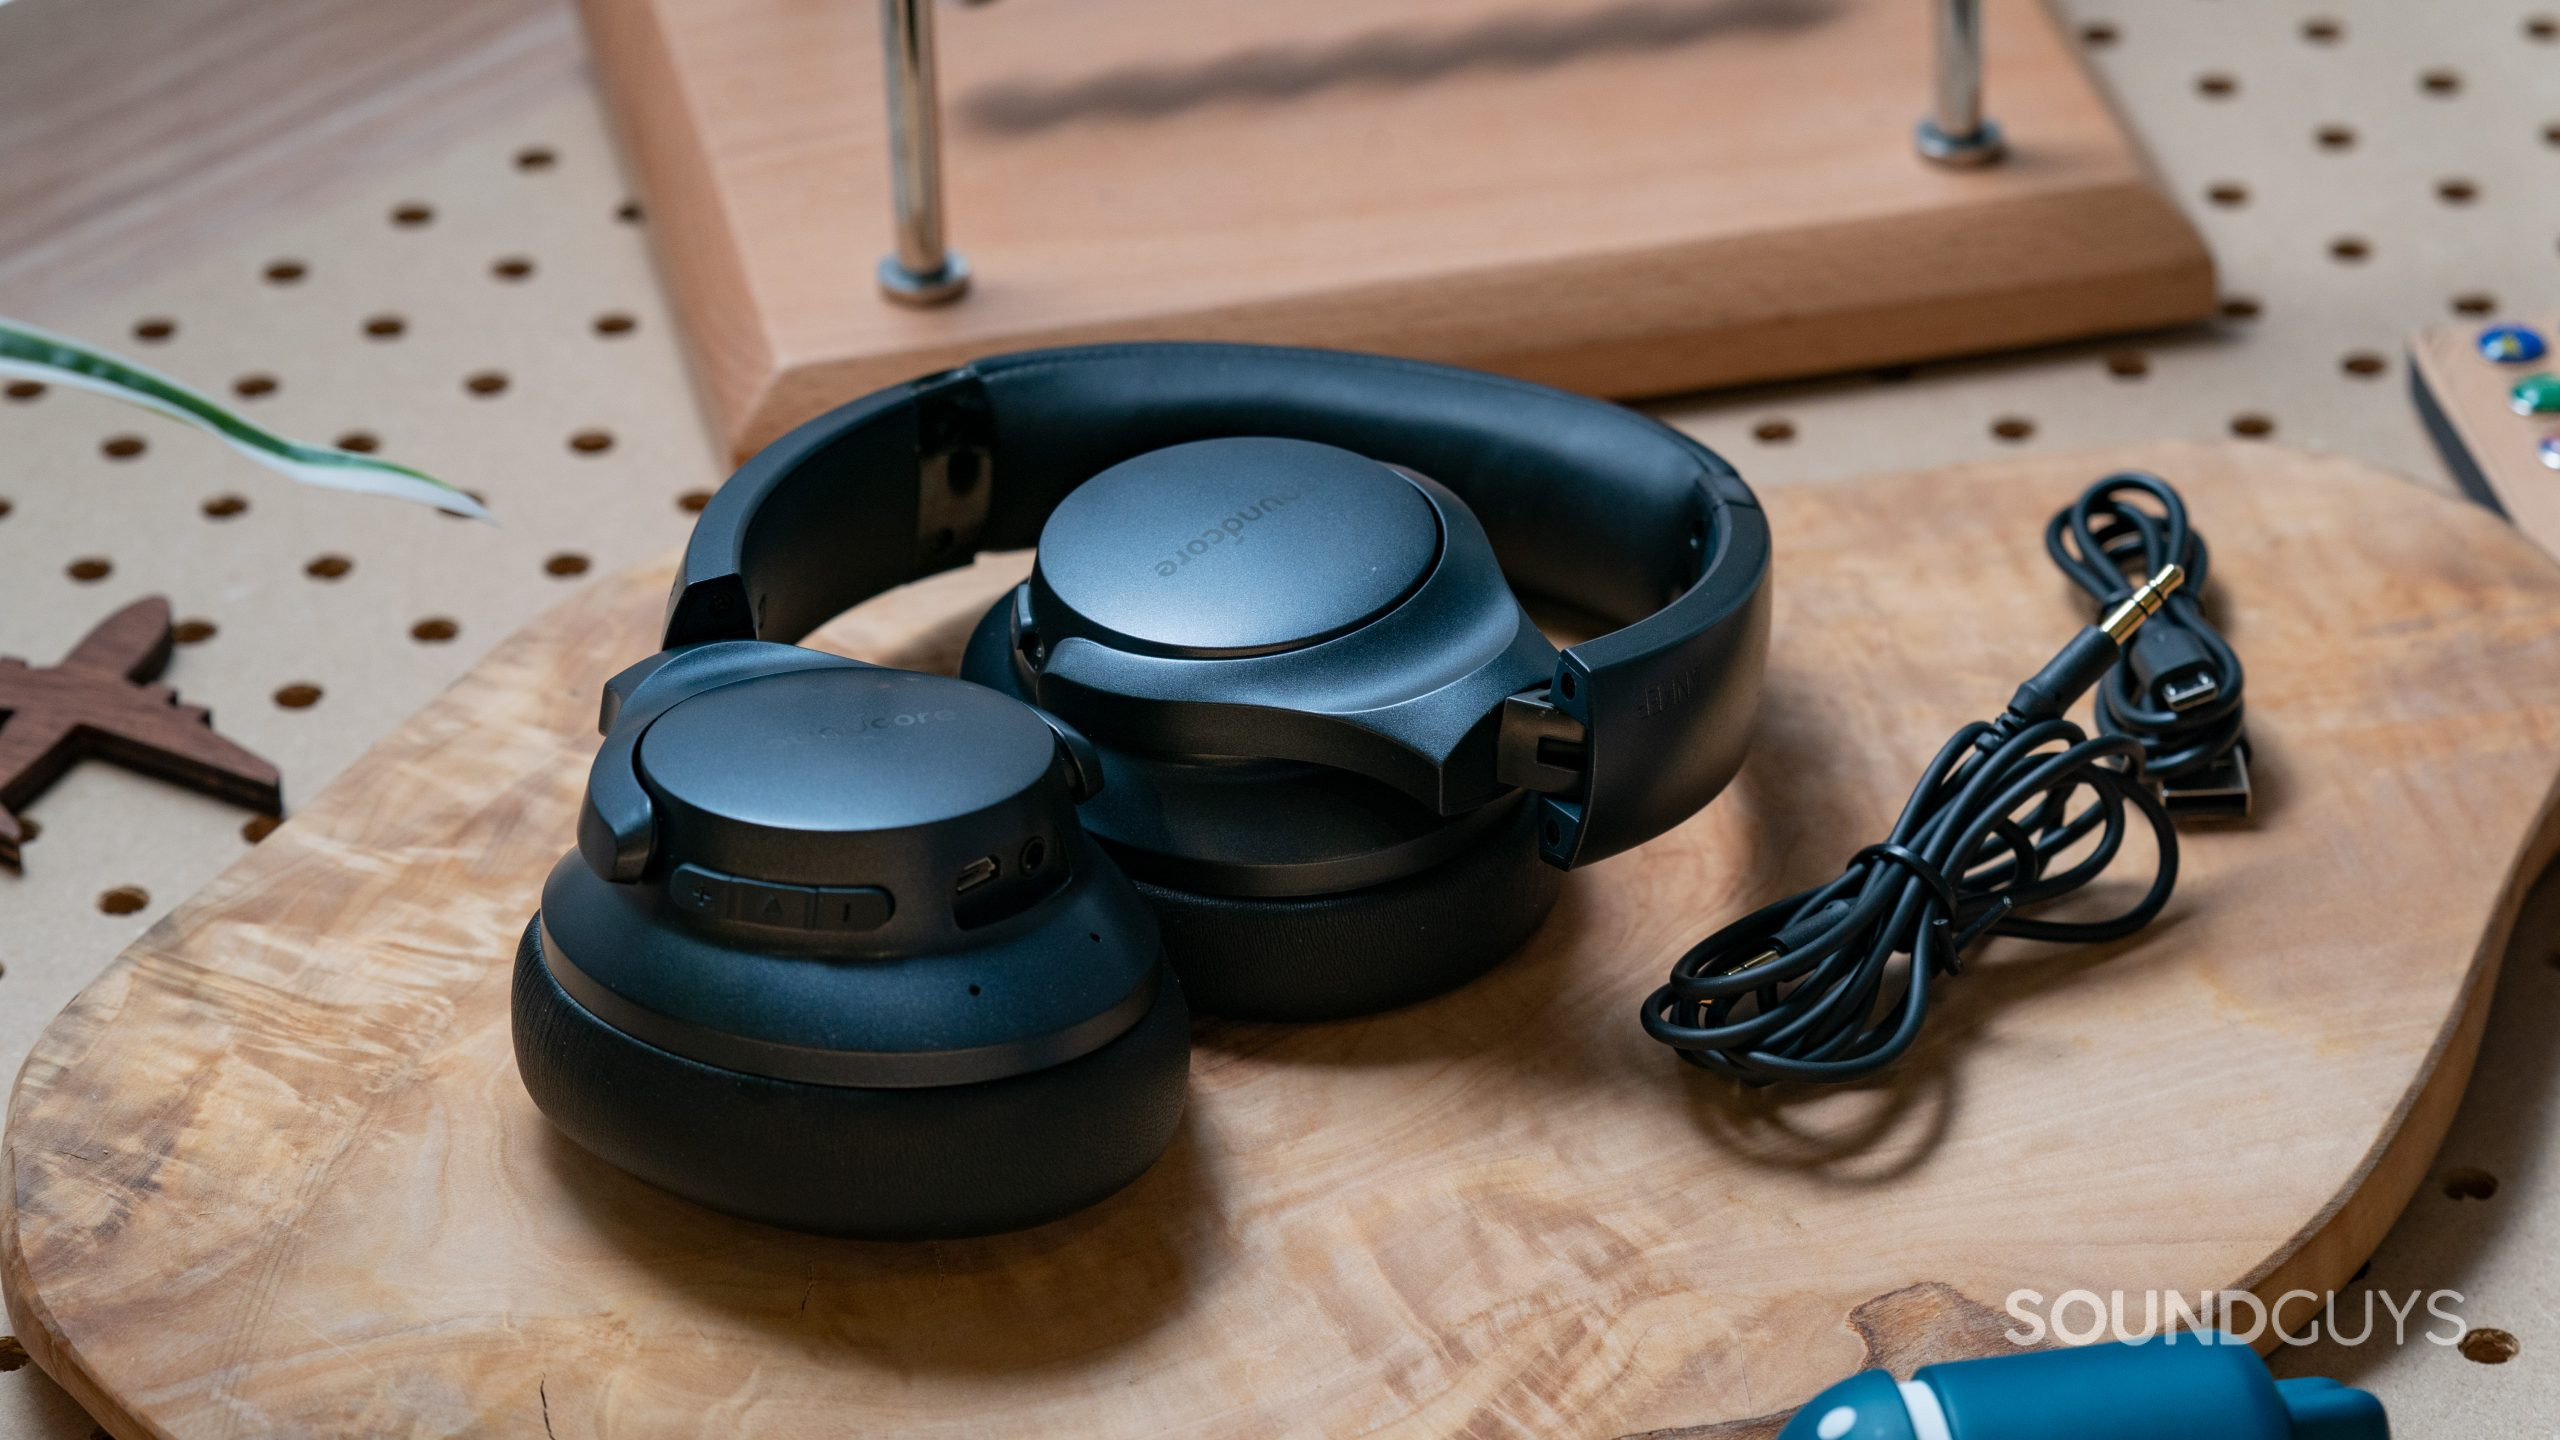 The Anker Soundcore Life Q20 headphones folded up on a wood surface next to the charging cable.